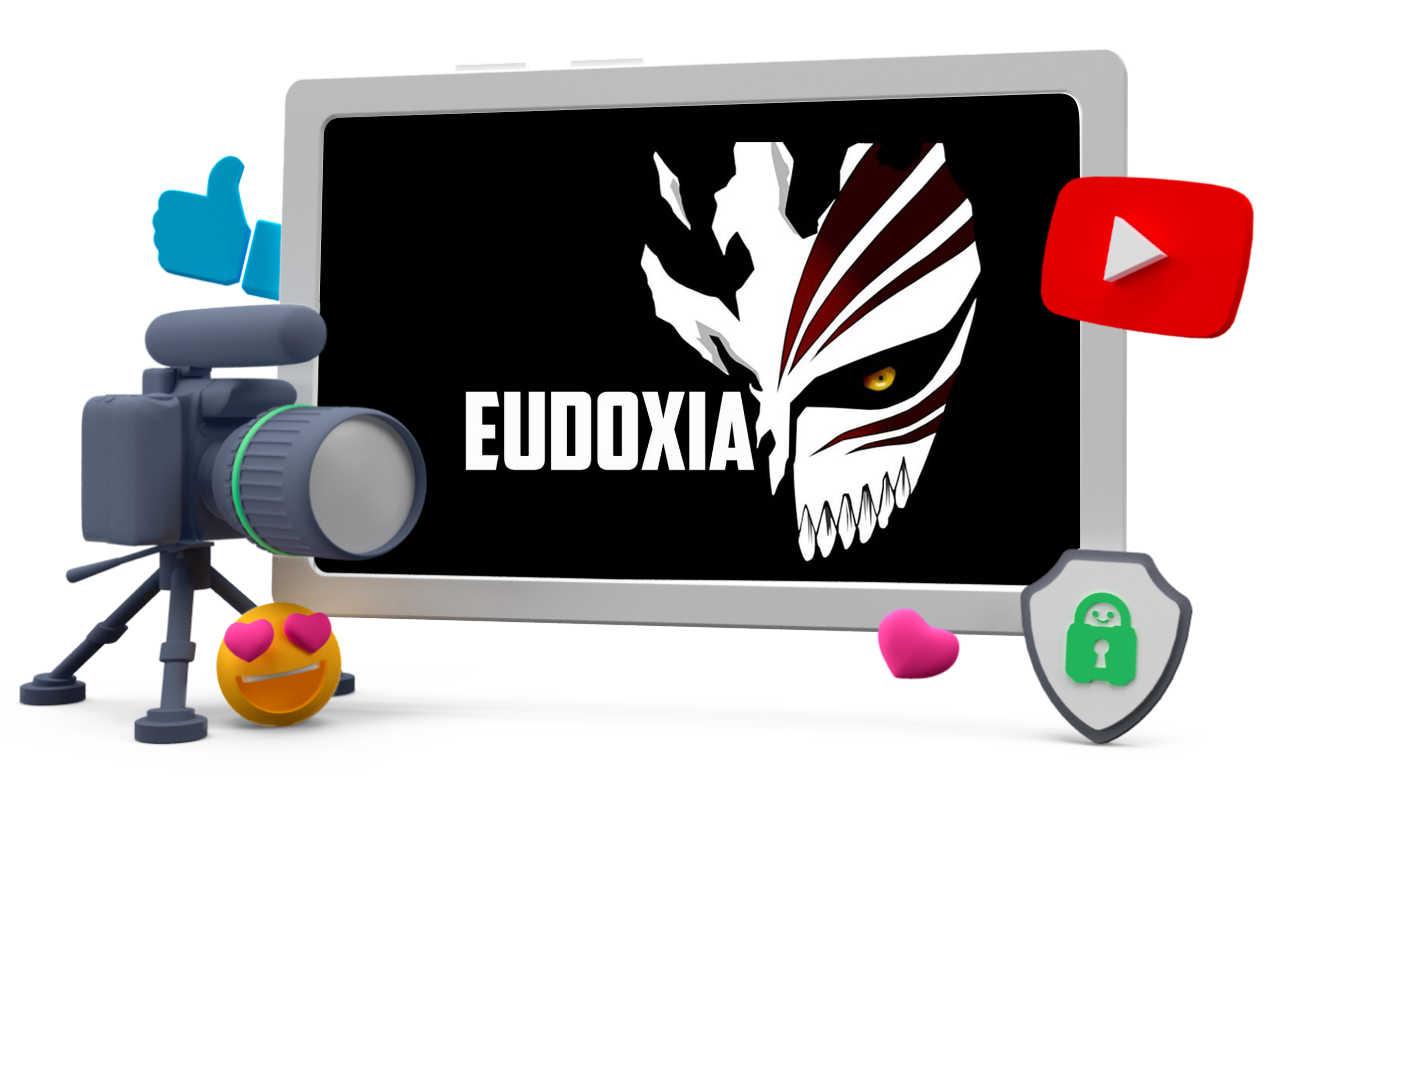 Eudoxia Mysteries